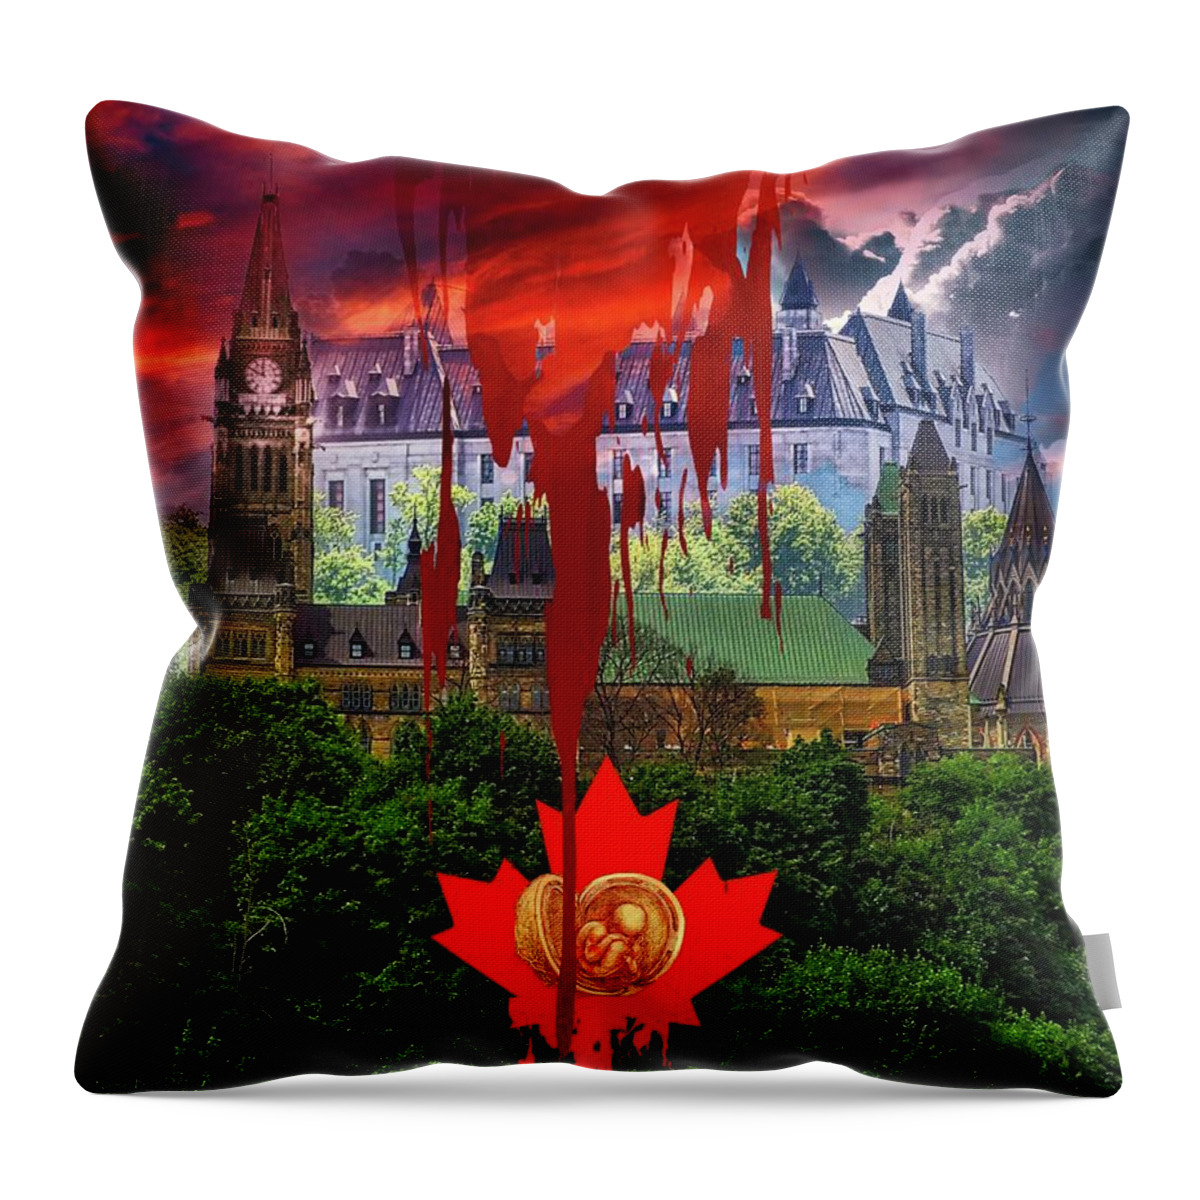 Blood Cries From Ground Throw Pillow featuring the digital art Canadian Justice by Norman Brule